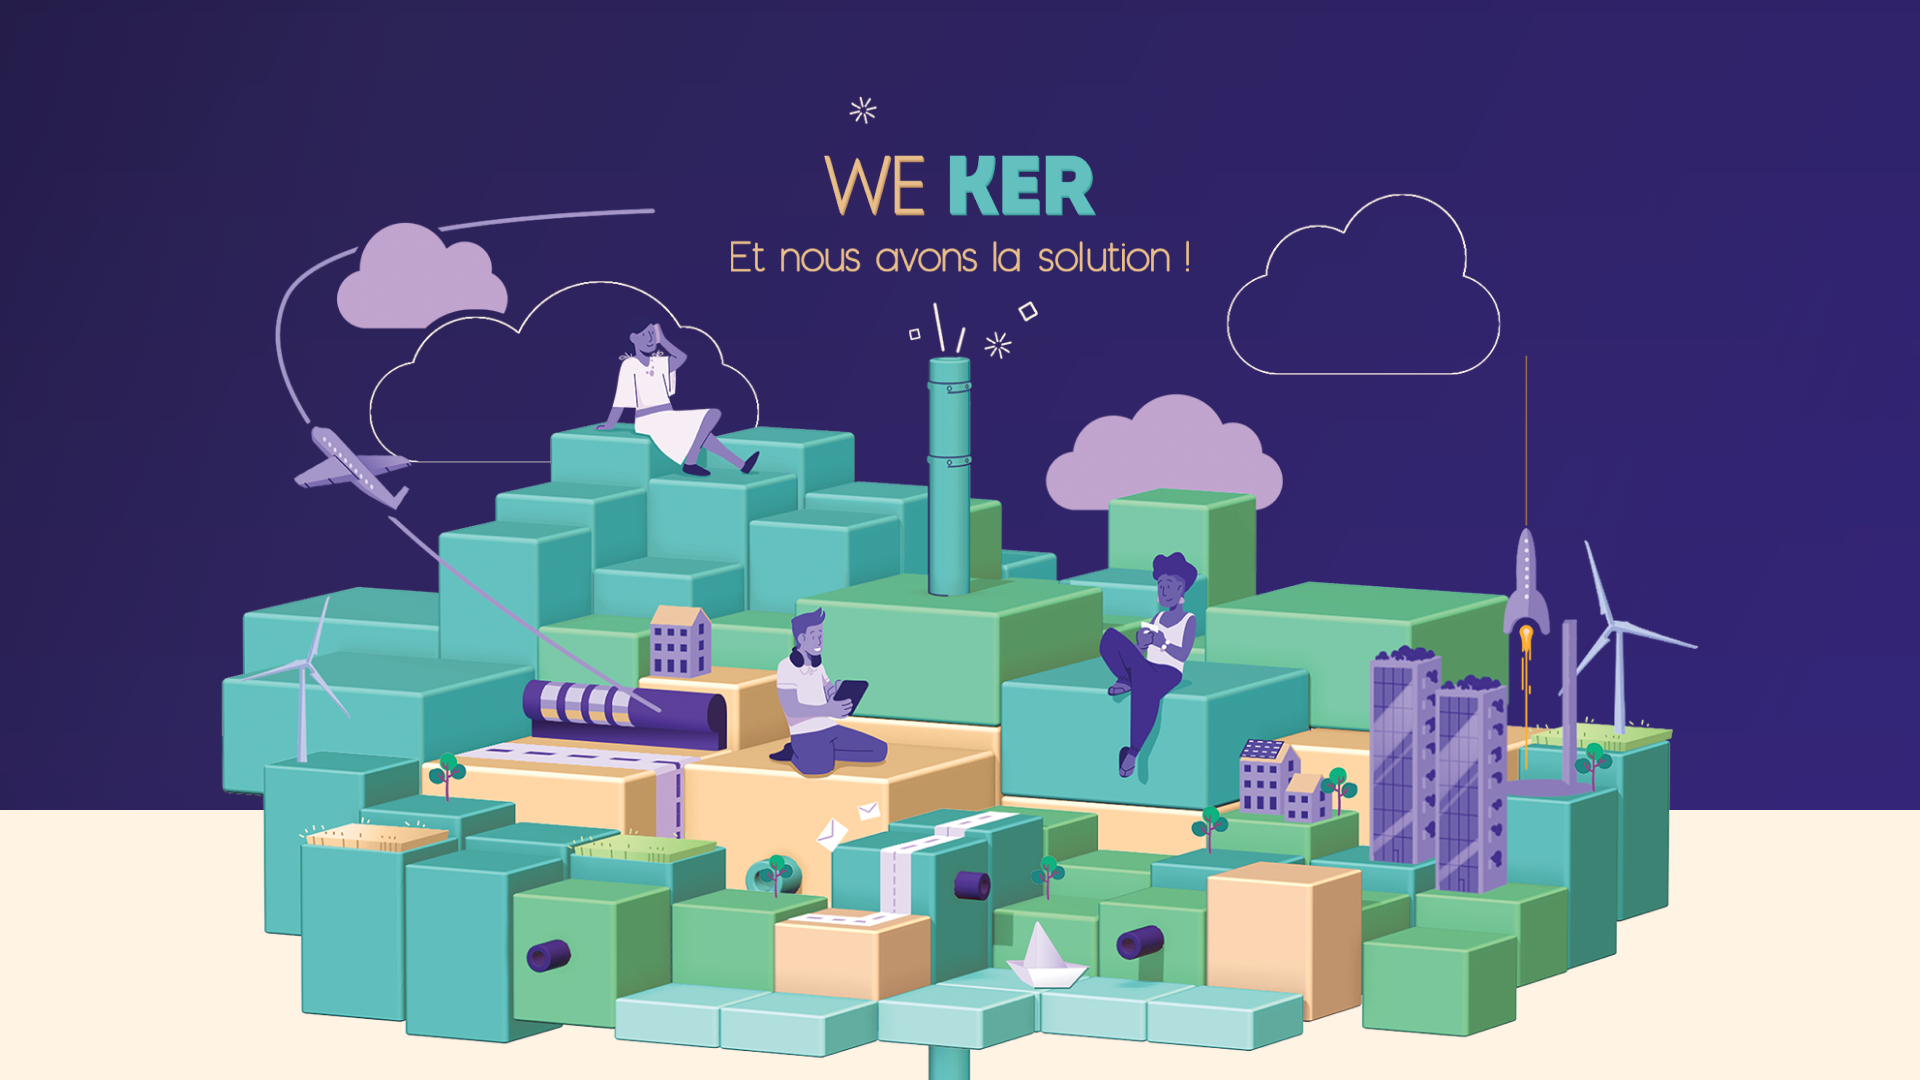 WEKER - VOTRE SOLUTION INTERACTIVE & SERIOUS GAME